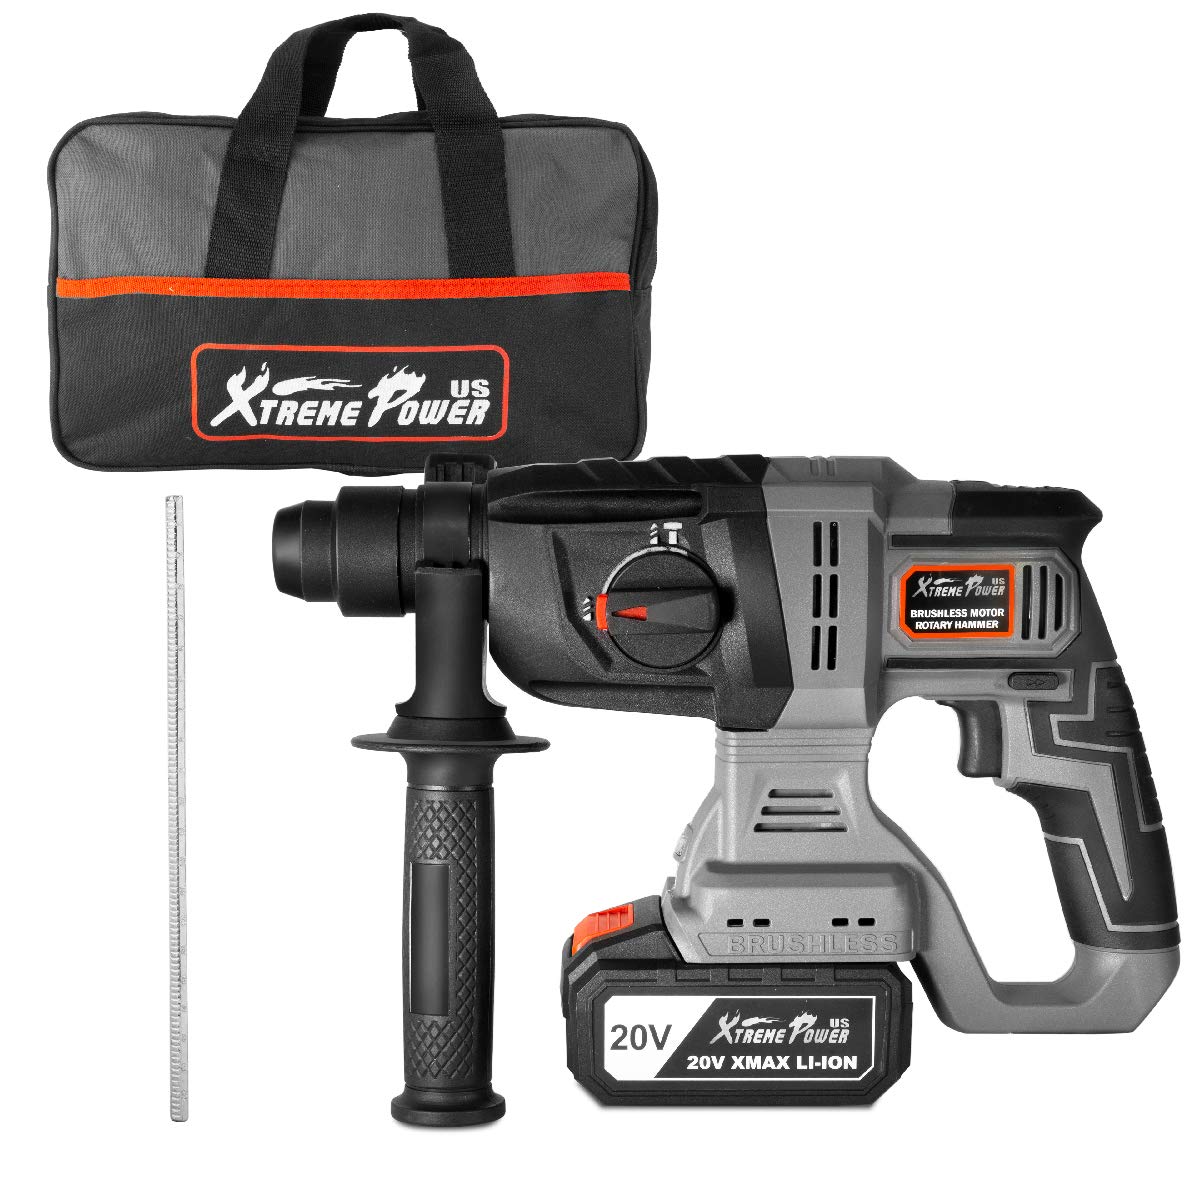 XtremepowerUS 20V Max SDS Plus Rotary Hammer Drill Brushless Cordless Demolition Hammer with 4.0Ah Lithium Battery and Charger